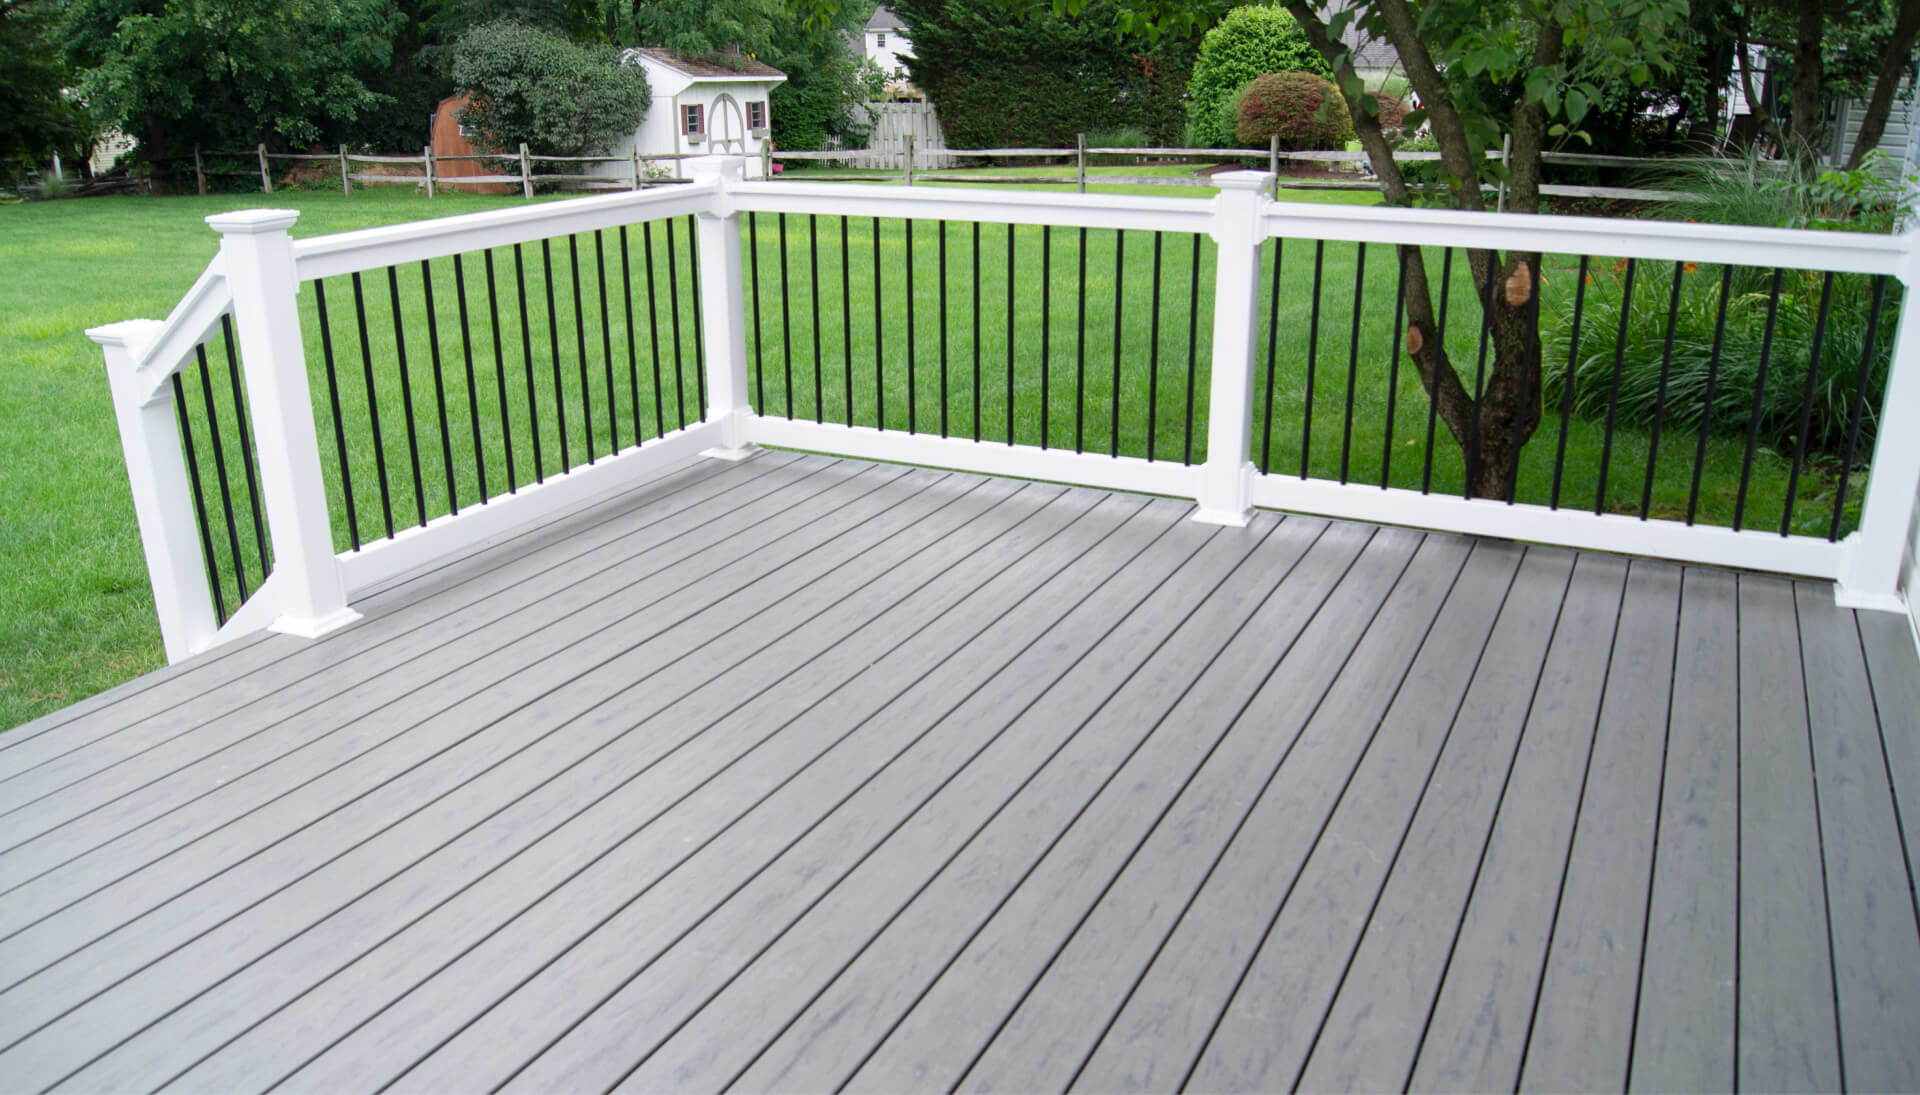 Deck Building Services in Naperville, IL: Our Deck Builders Design Railing and Covers for Your Unique Style